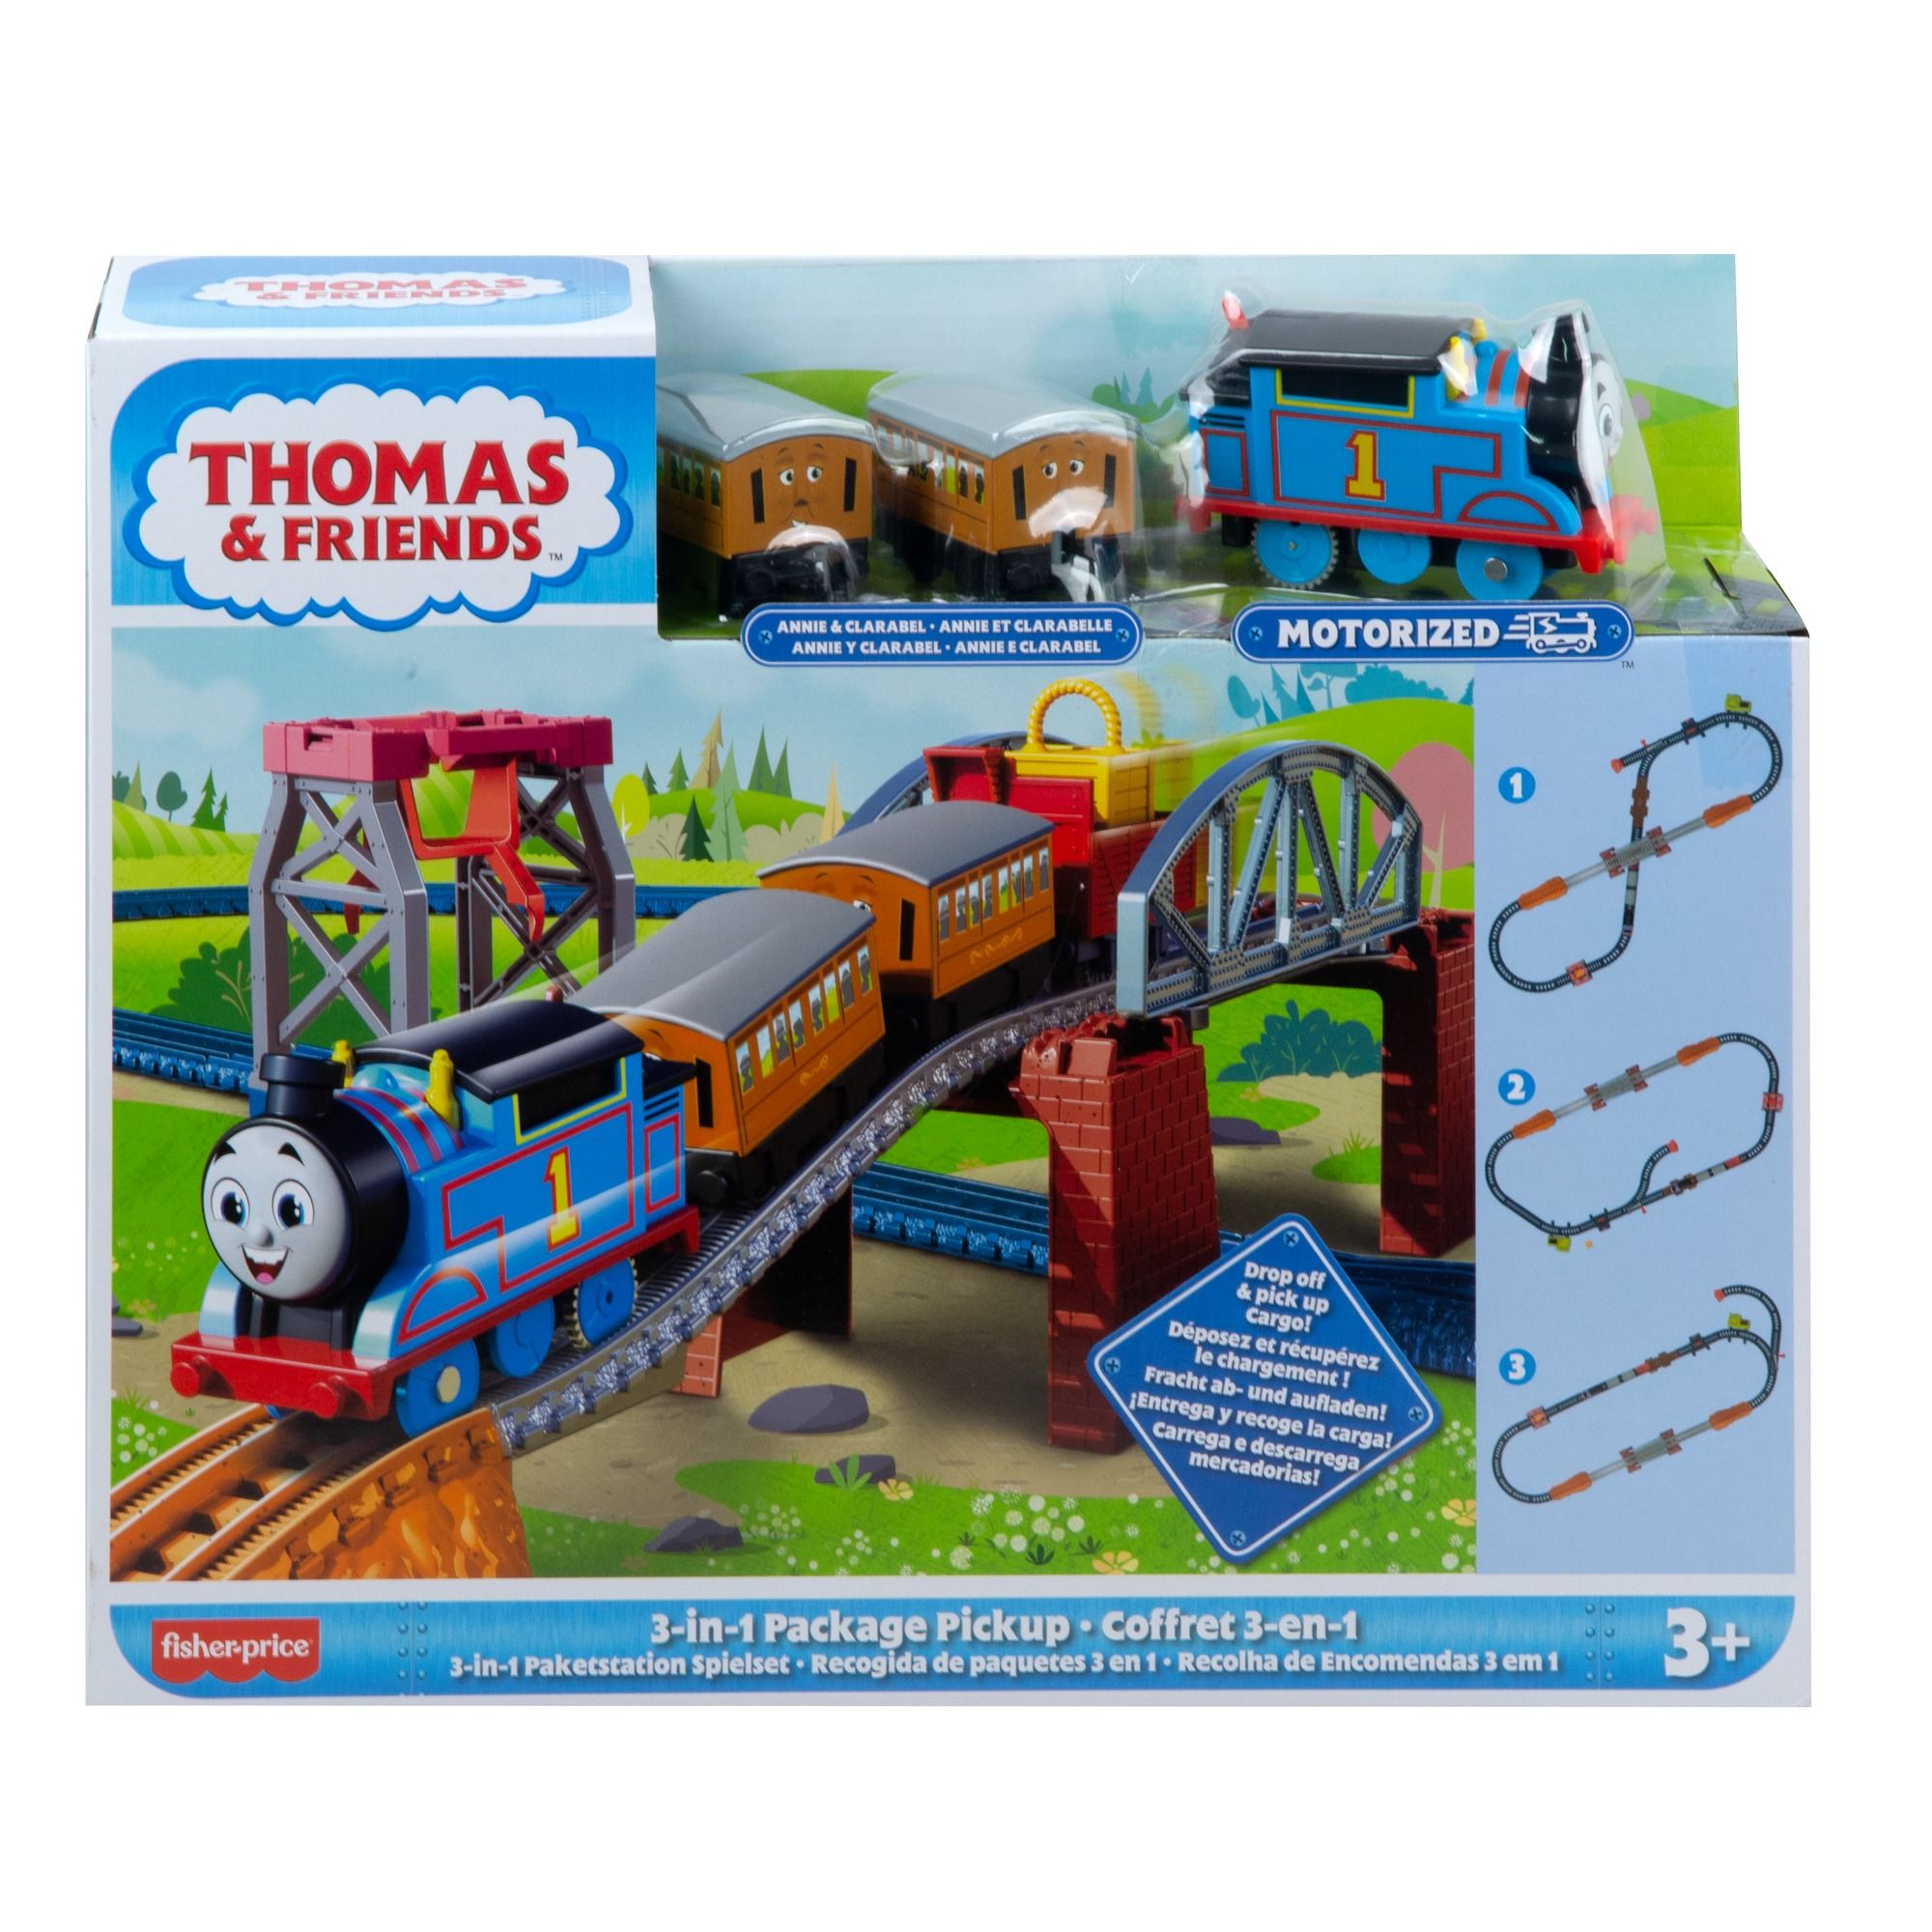 An image of Thomas & Friends 3-in-1 Package Pickup